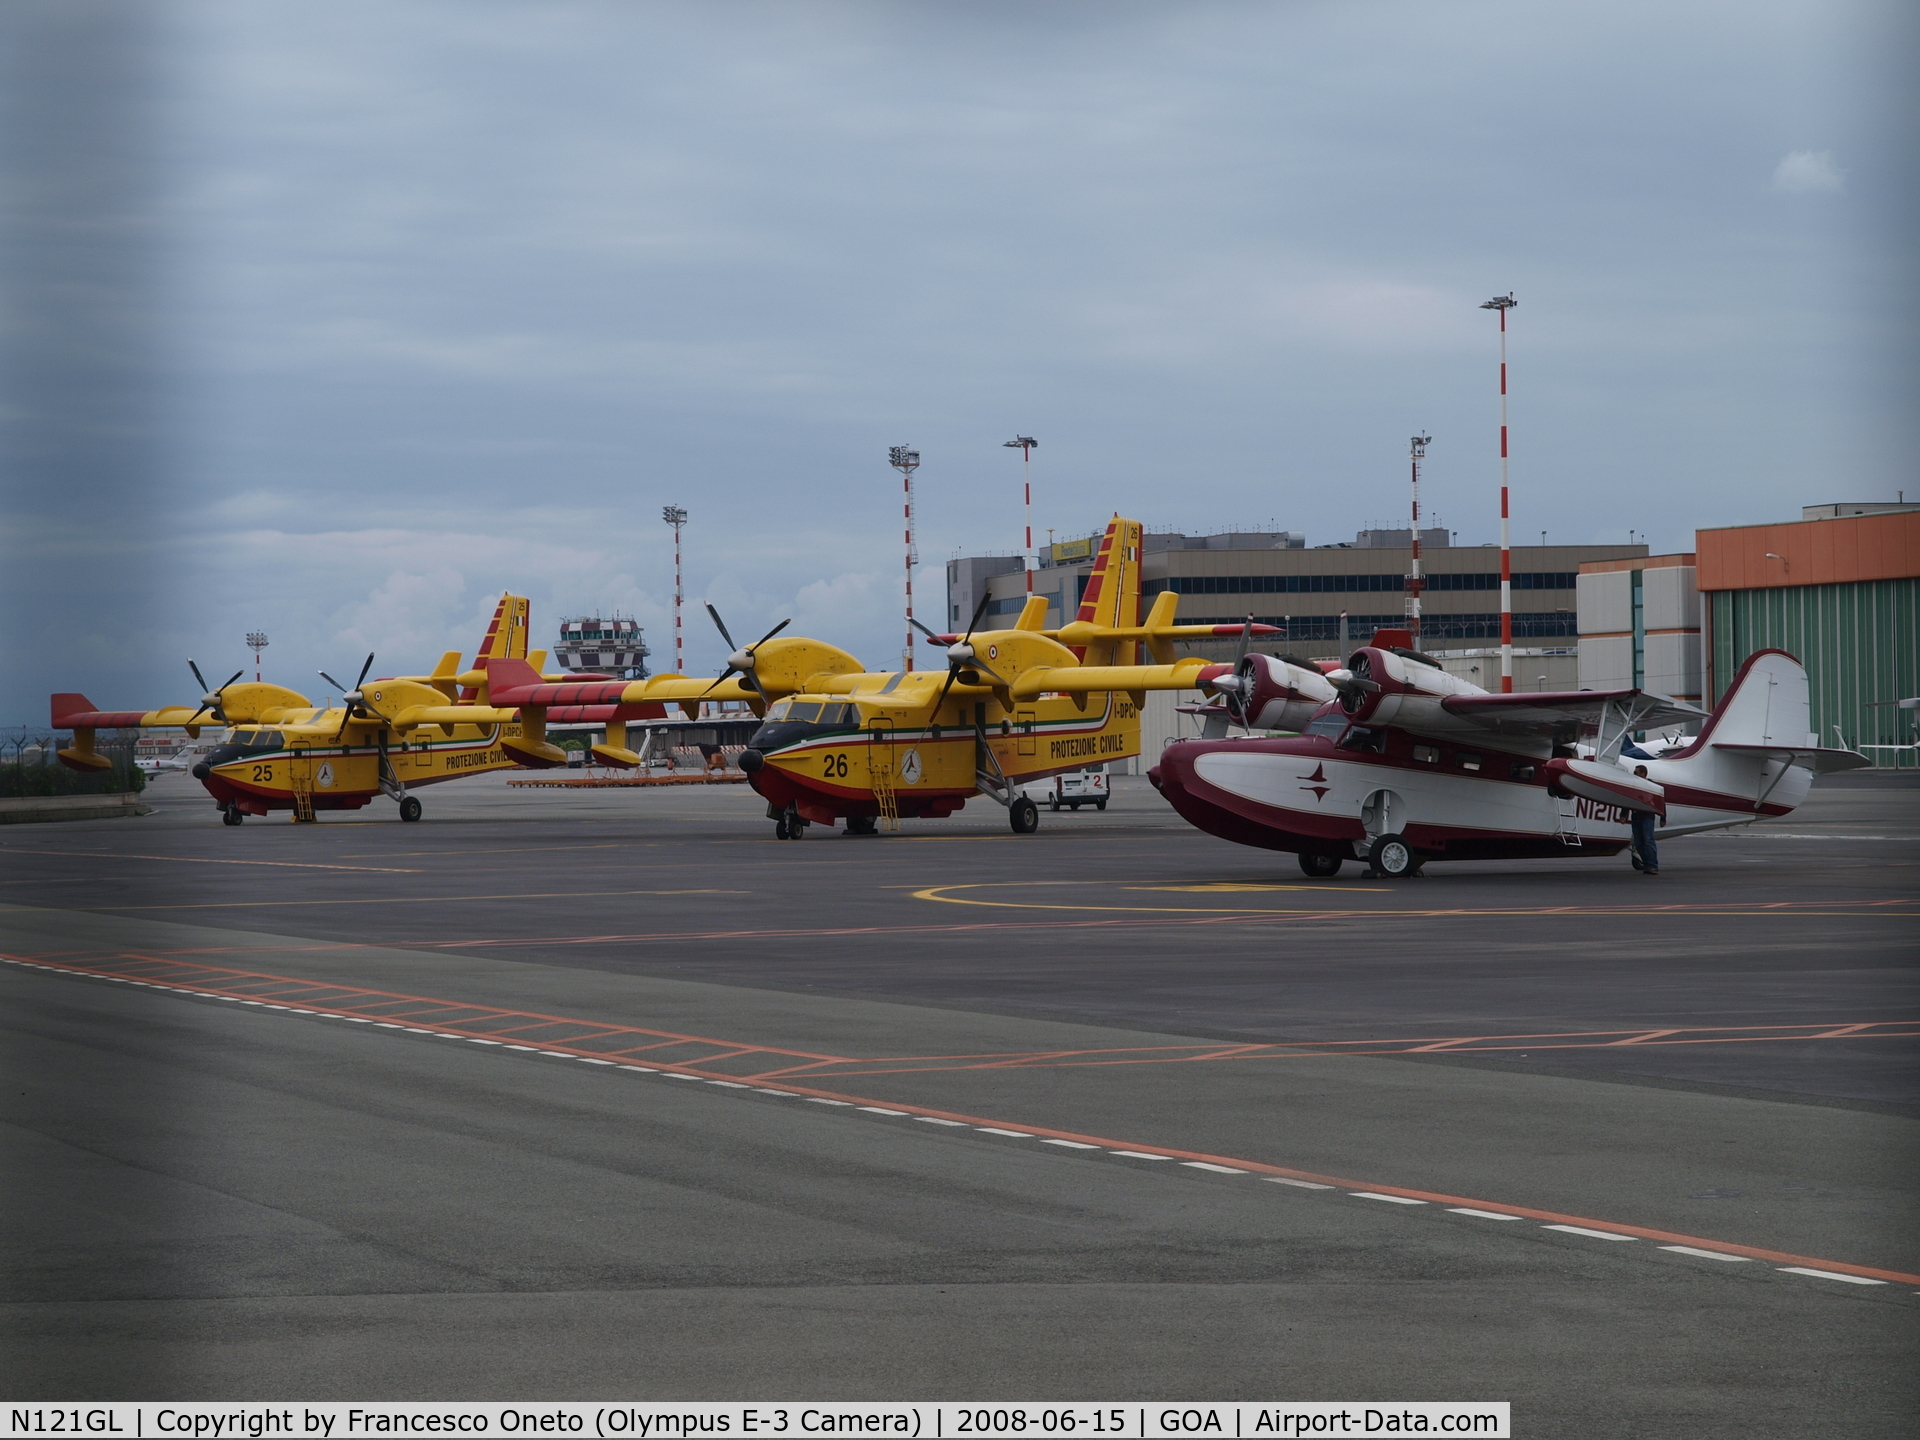 N121GL, 1944 Grumman G-21A Goose C/N B-49, along with two Canadair CL-415 of Protezione Civile Italiana